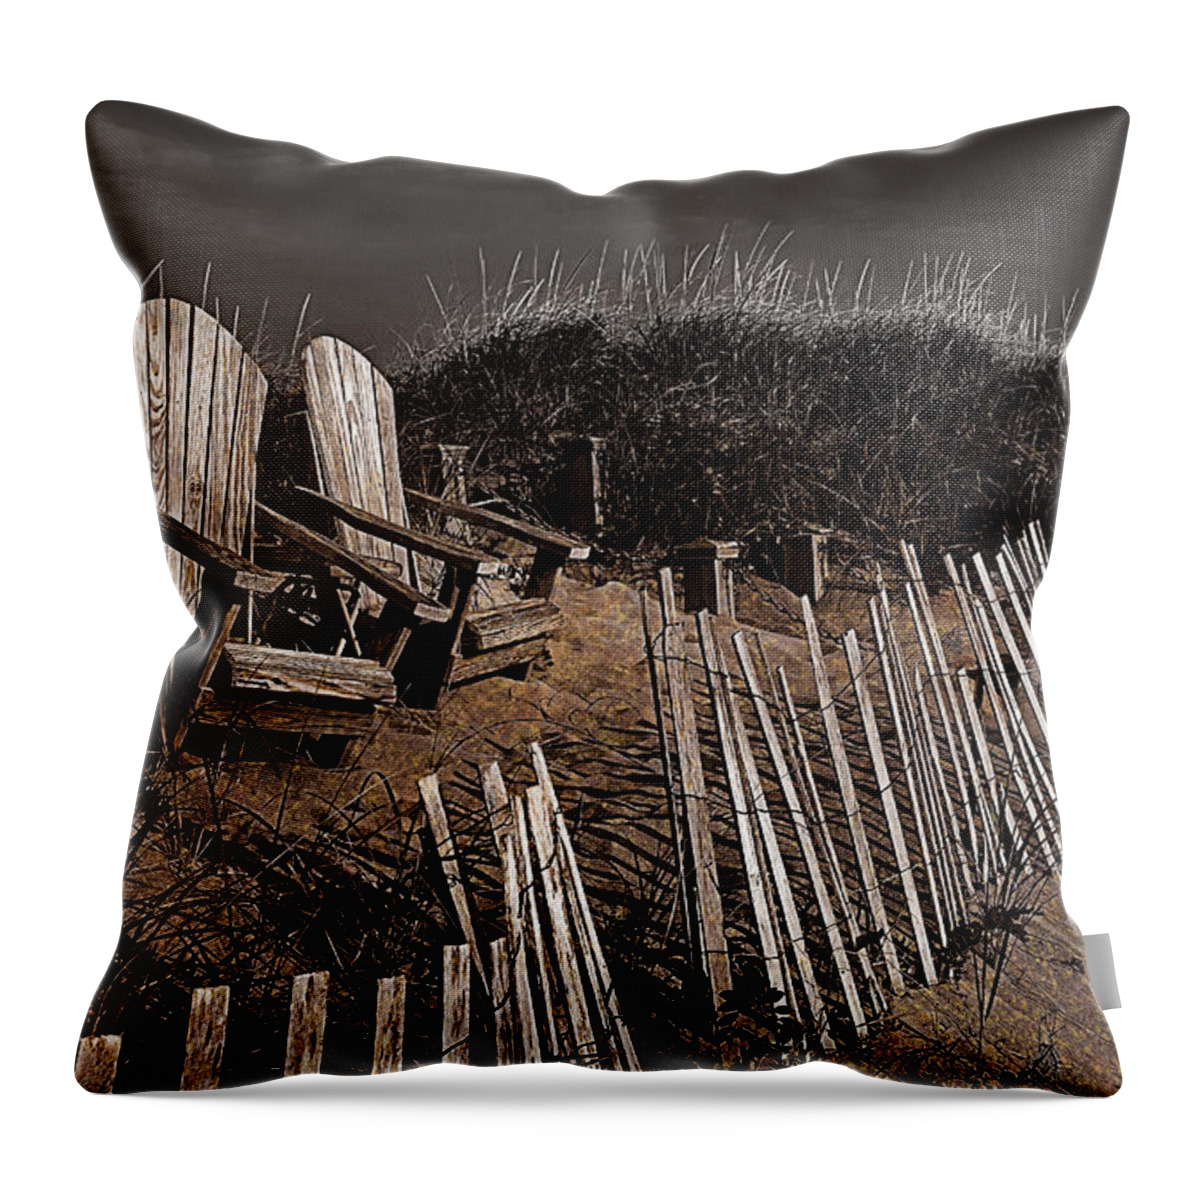 Duotone Throw Pillow featuring the photograph Adirondack Beach Chairs by Rick Mosher